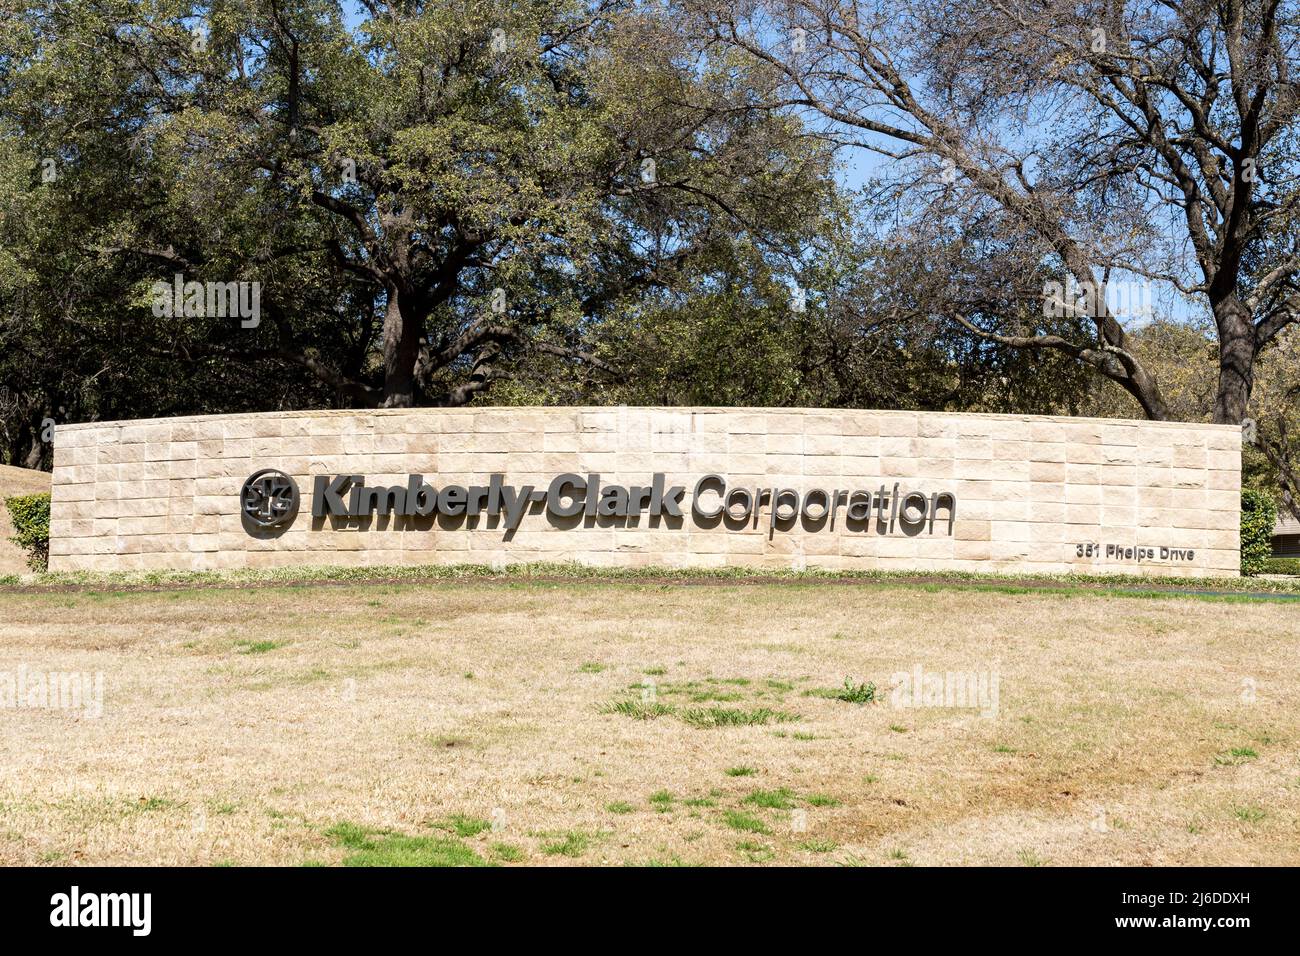 Irving,  Texas, USA - March 20, 2022: Kimberly-Clark Corporation’s sign at its headquarters in Irving,  Texas, USA. Stock Photo